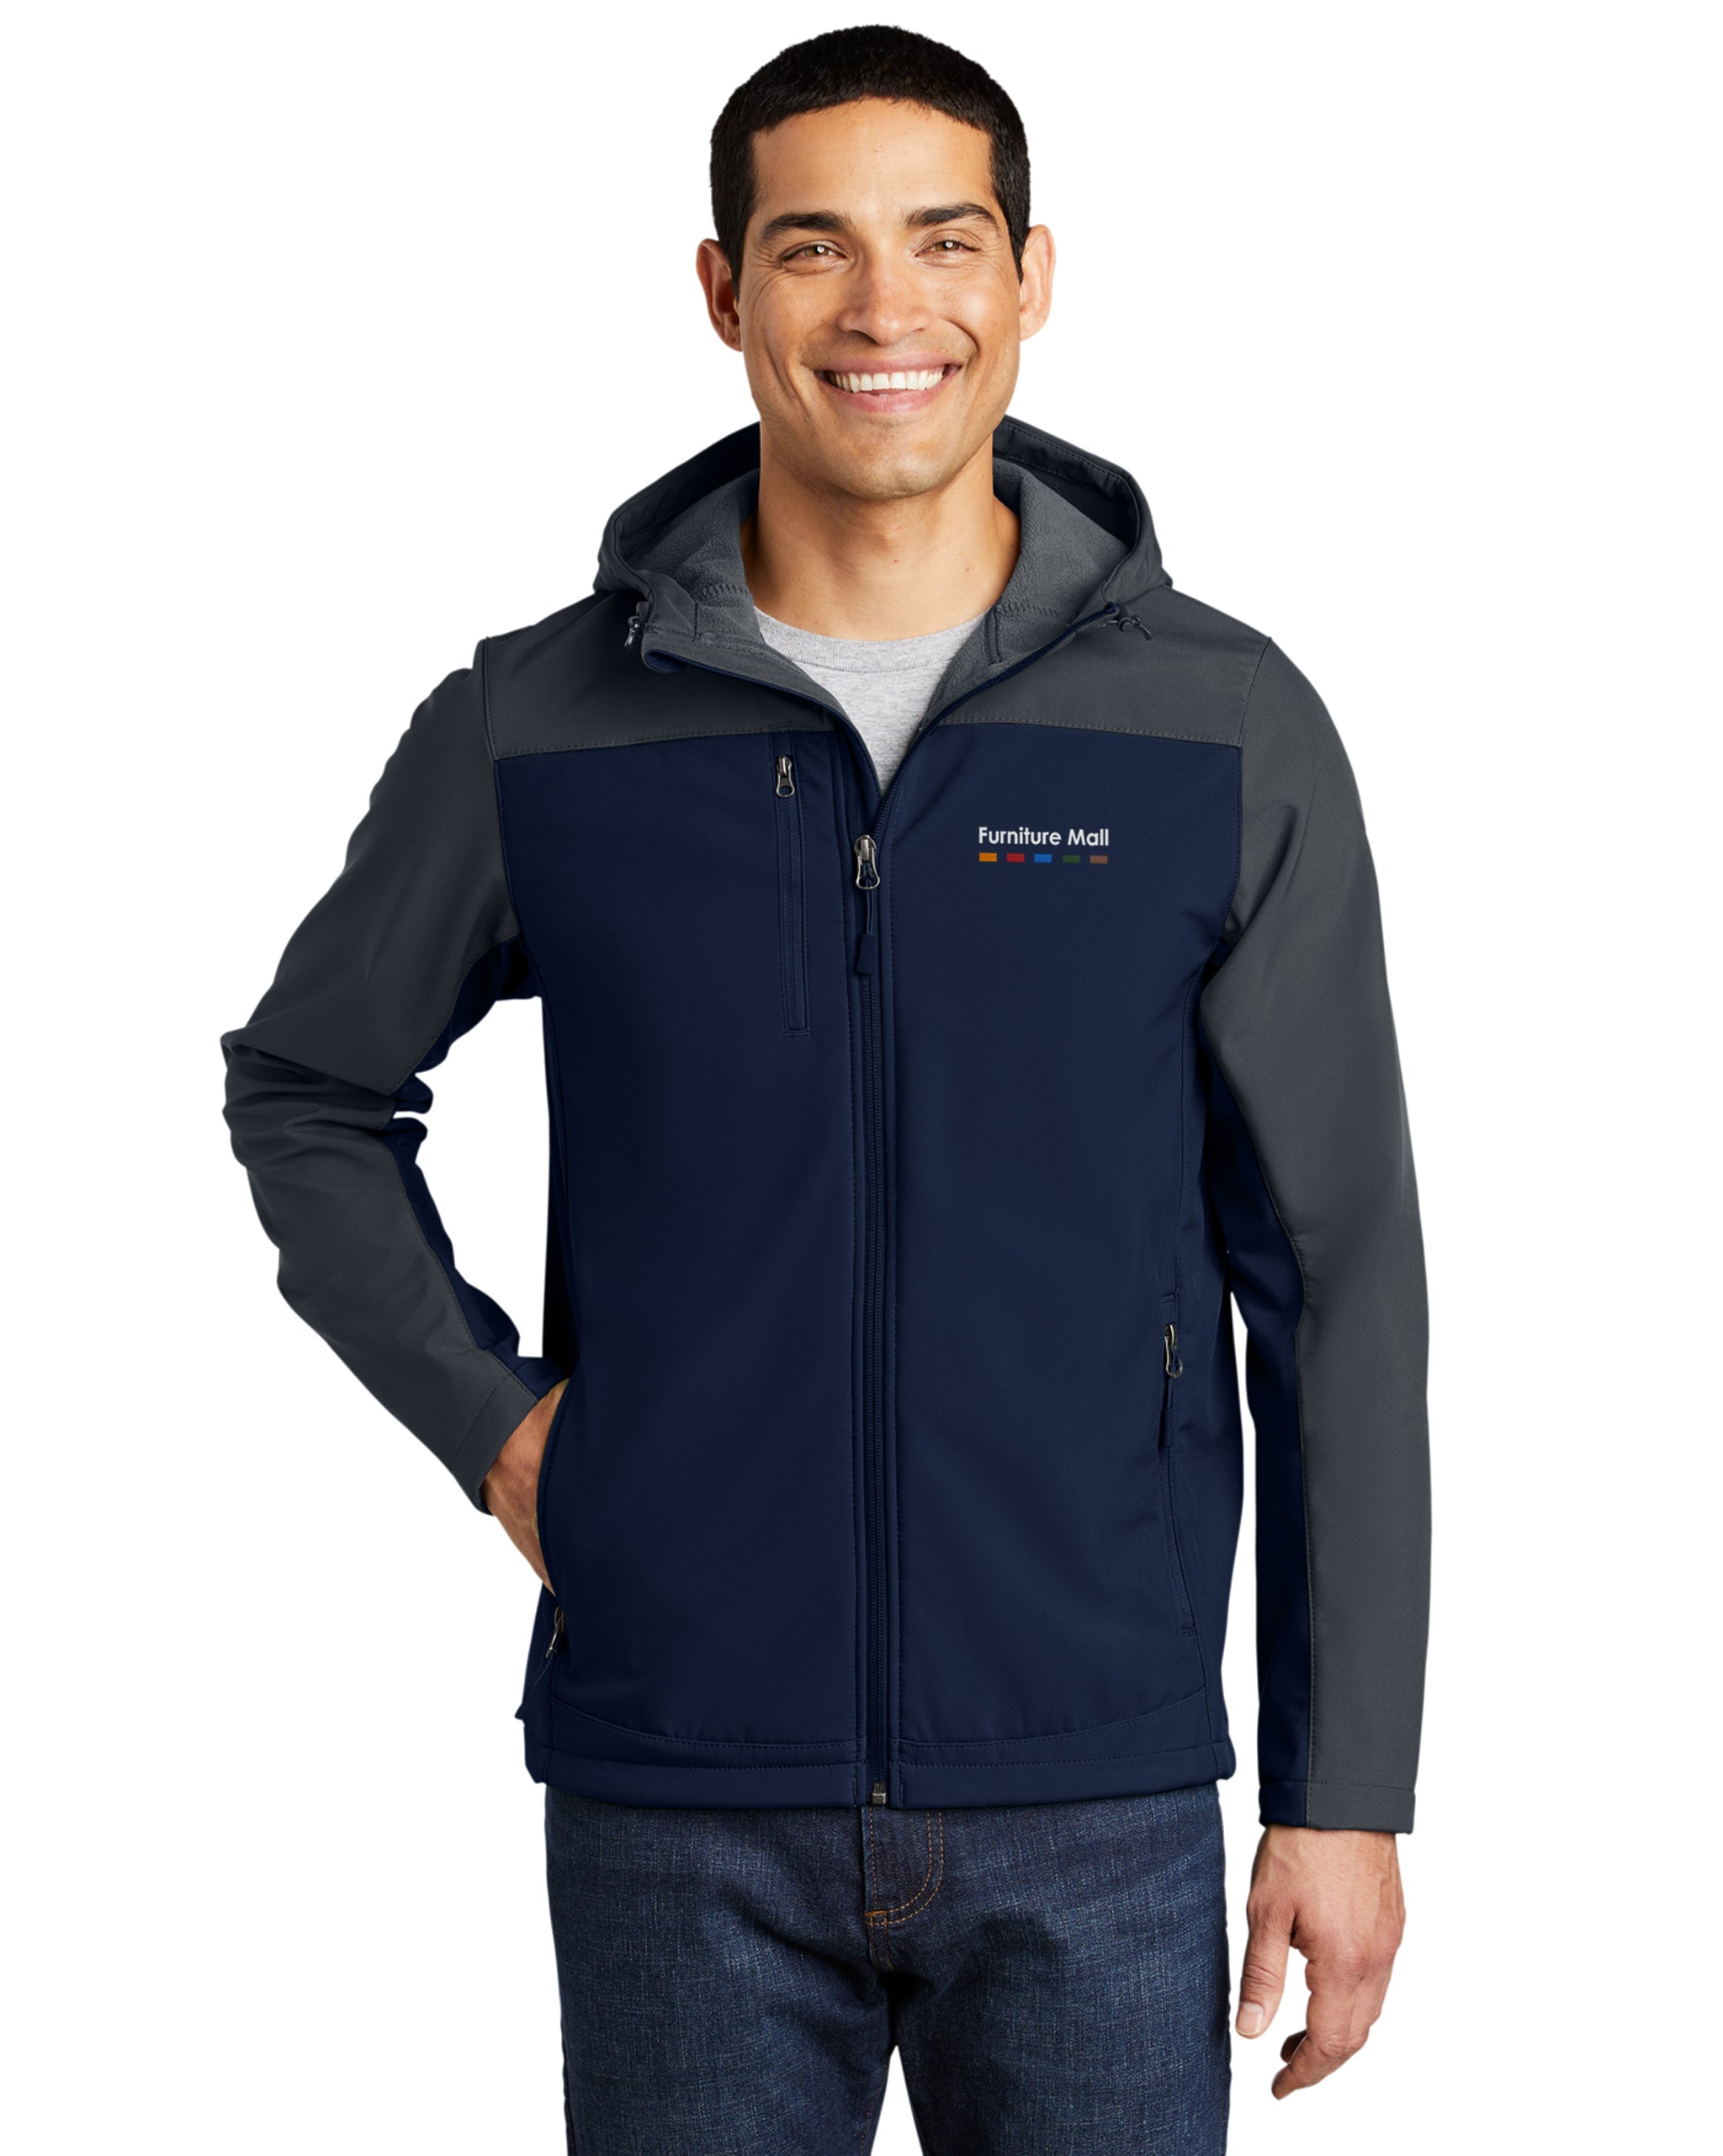 Furniture Mall - Port Authority Hooded Core Soft Shell Jacket - J335